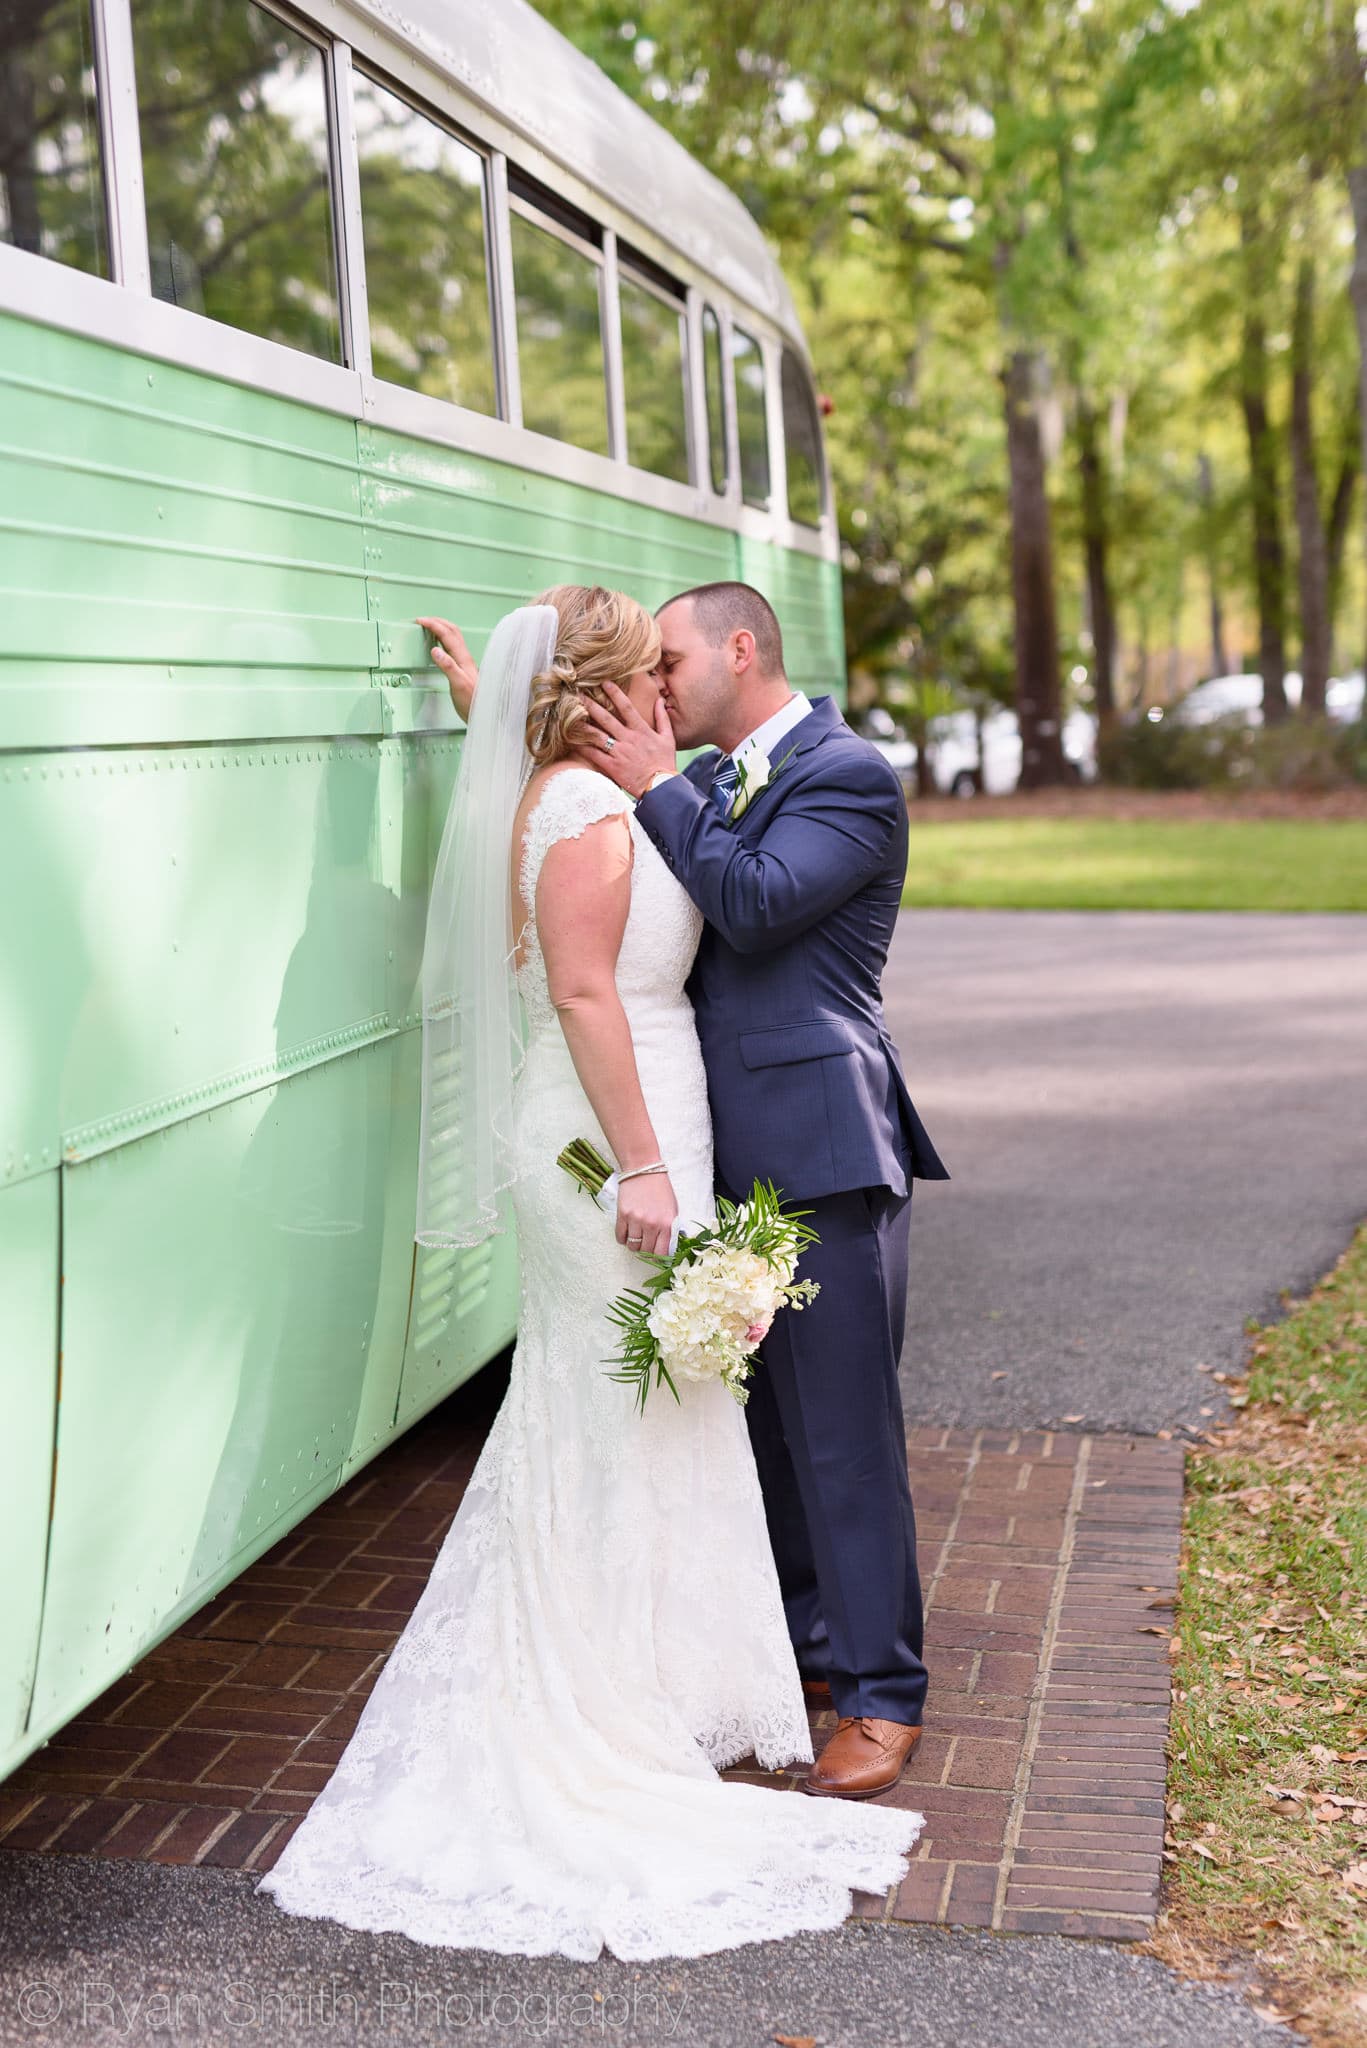 Bride and groom kissing beside the classic green bus - Pawleys Plantation